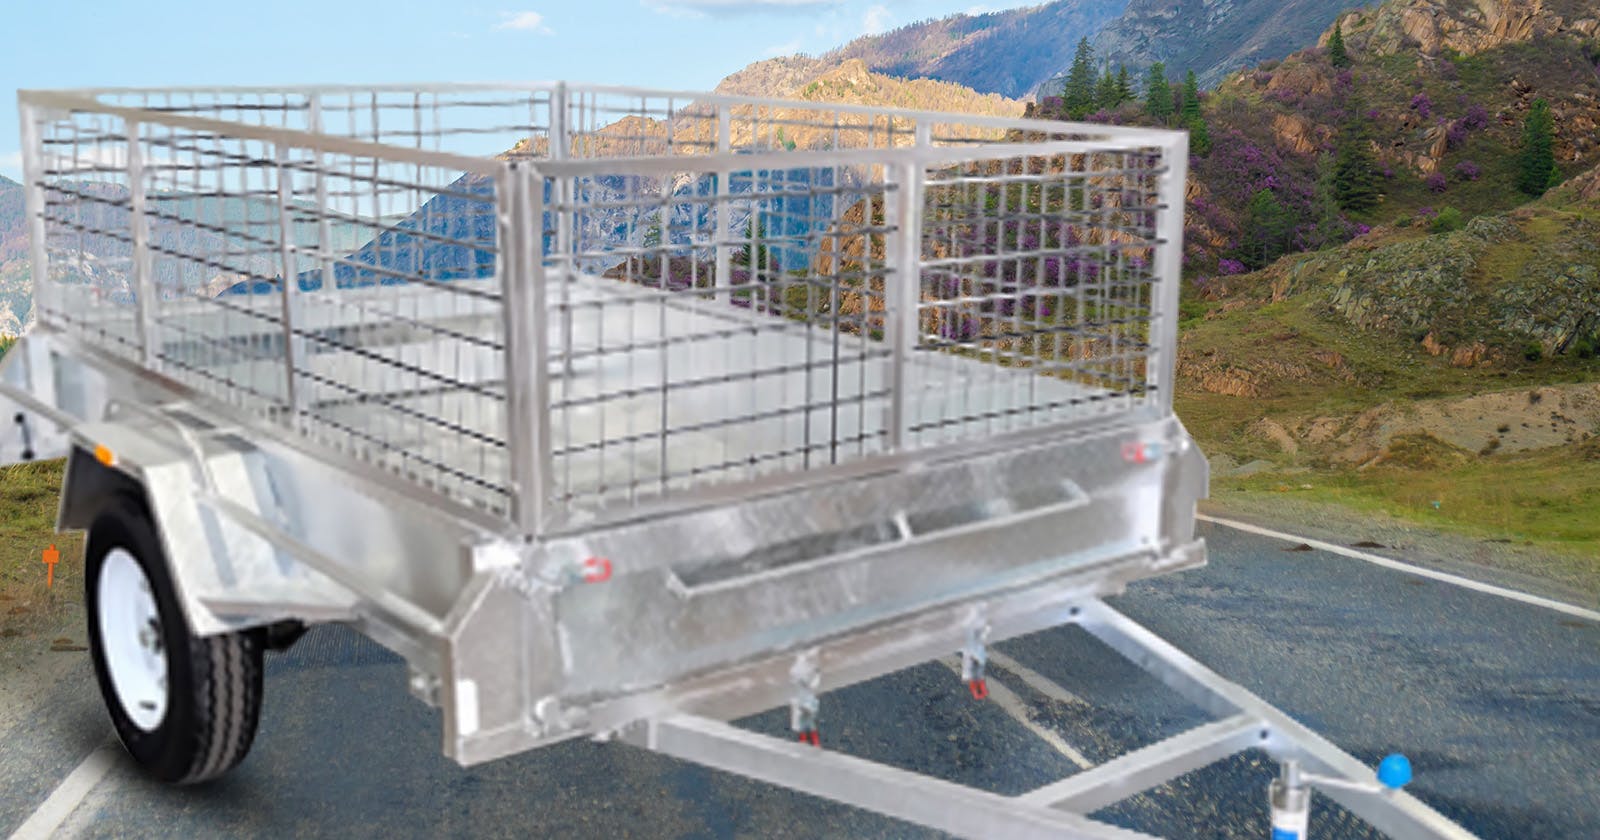 Choosing the Right 8 x 5 Tandem Trailer: Features and Considerations